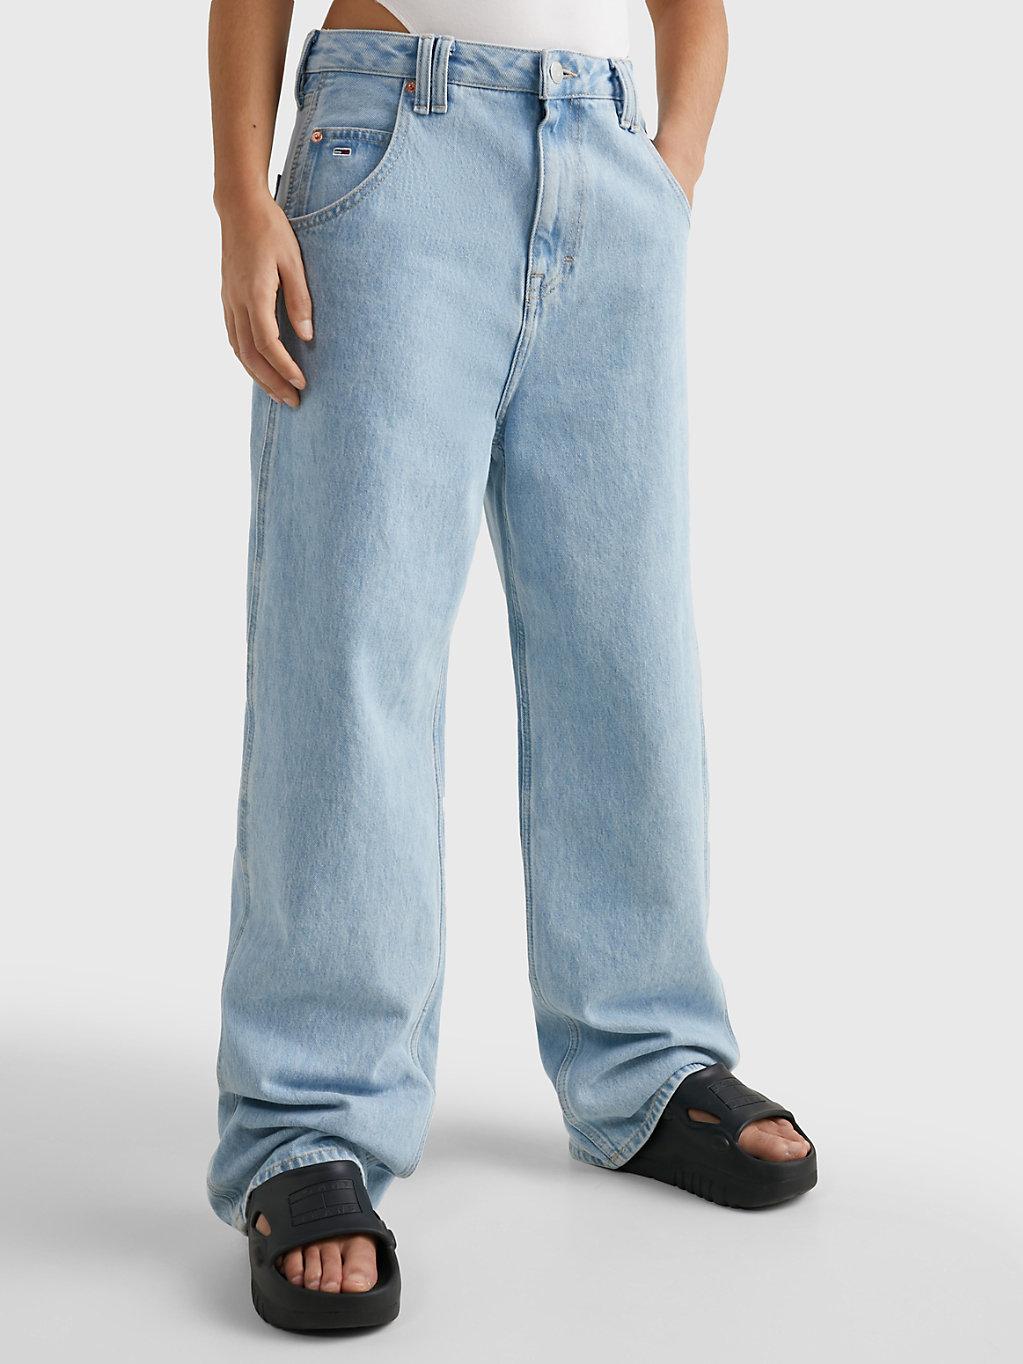 Tommy Hilfiger Daisy Low Rise Baggy Faded Jeans in Blue | Lyst UK